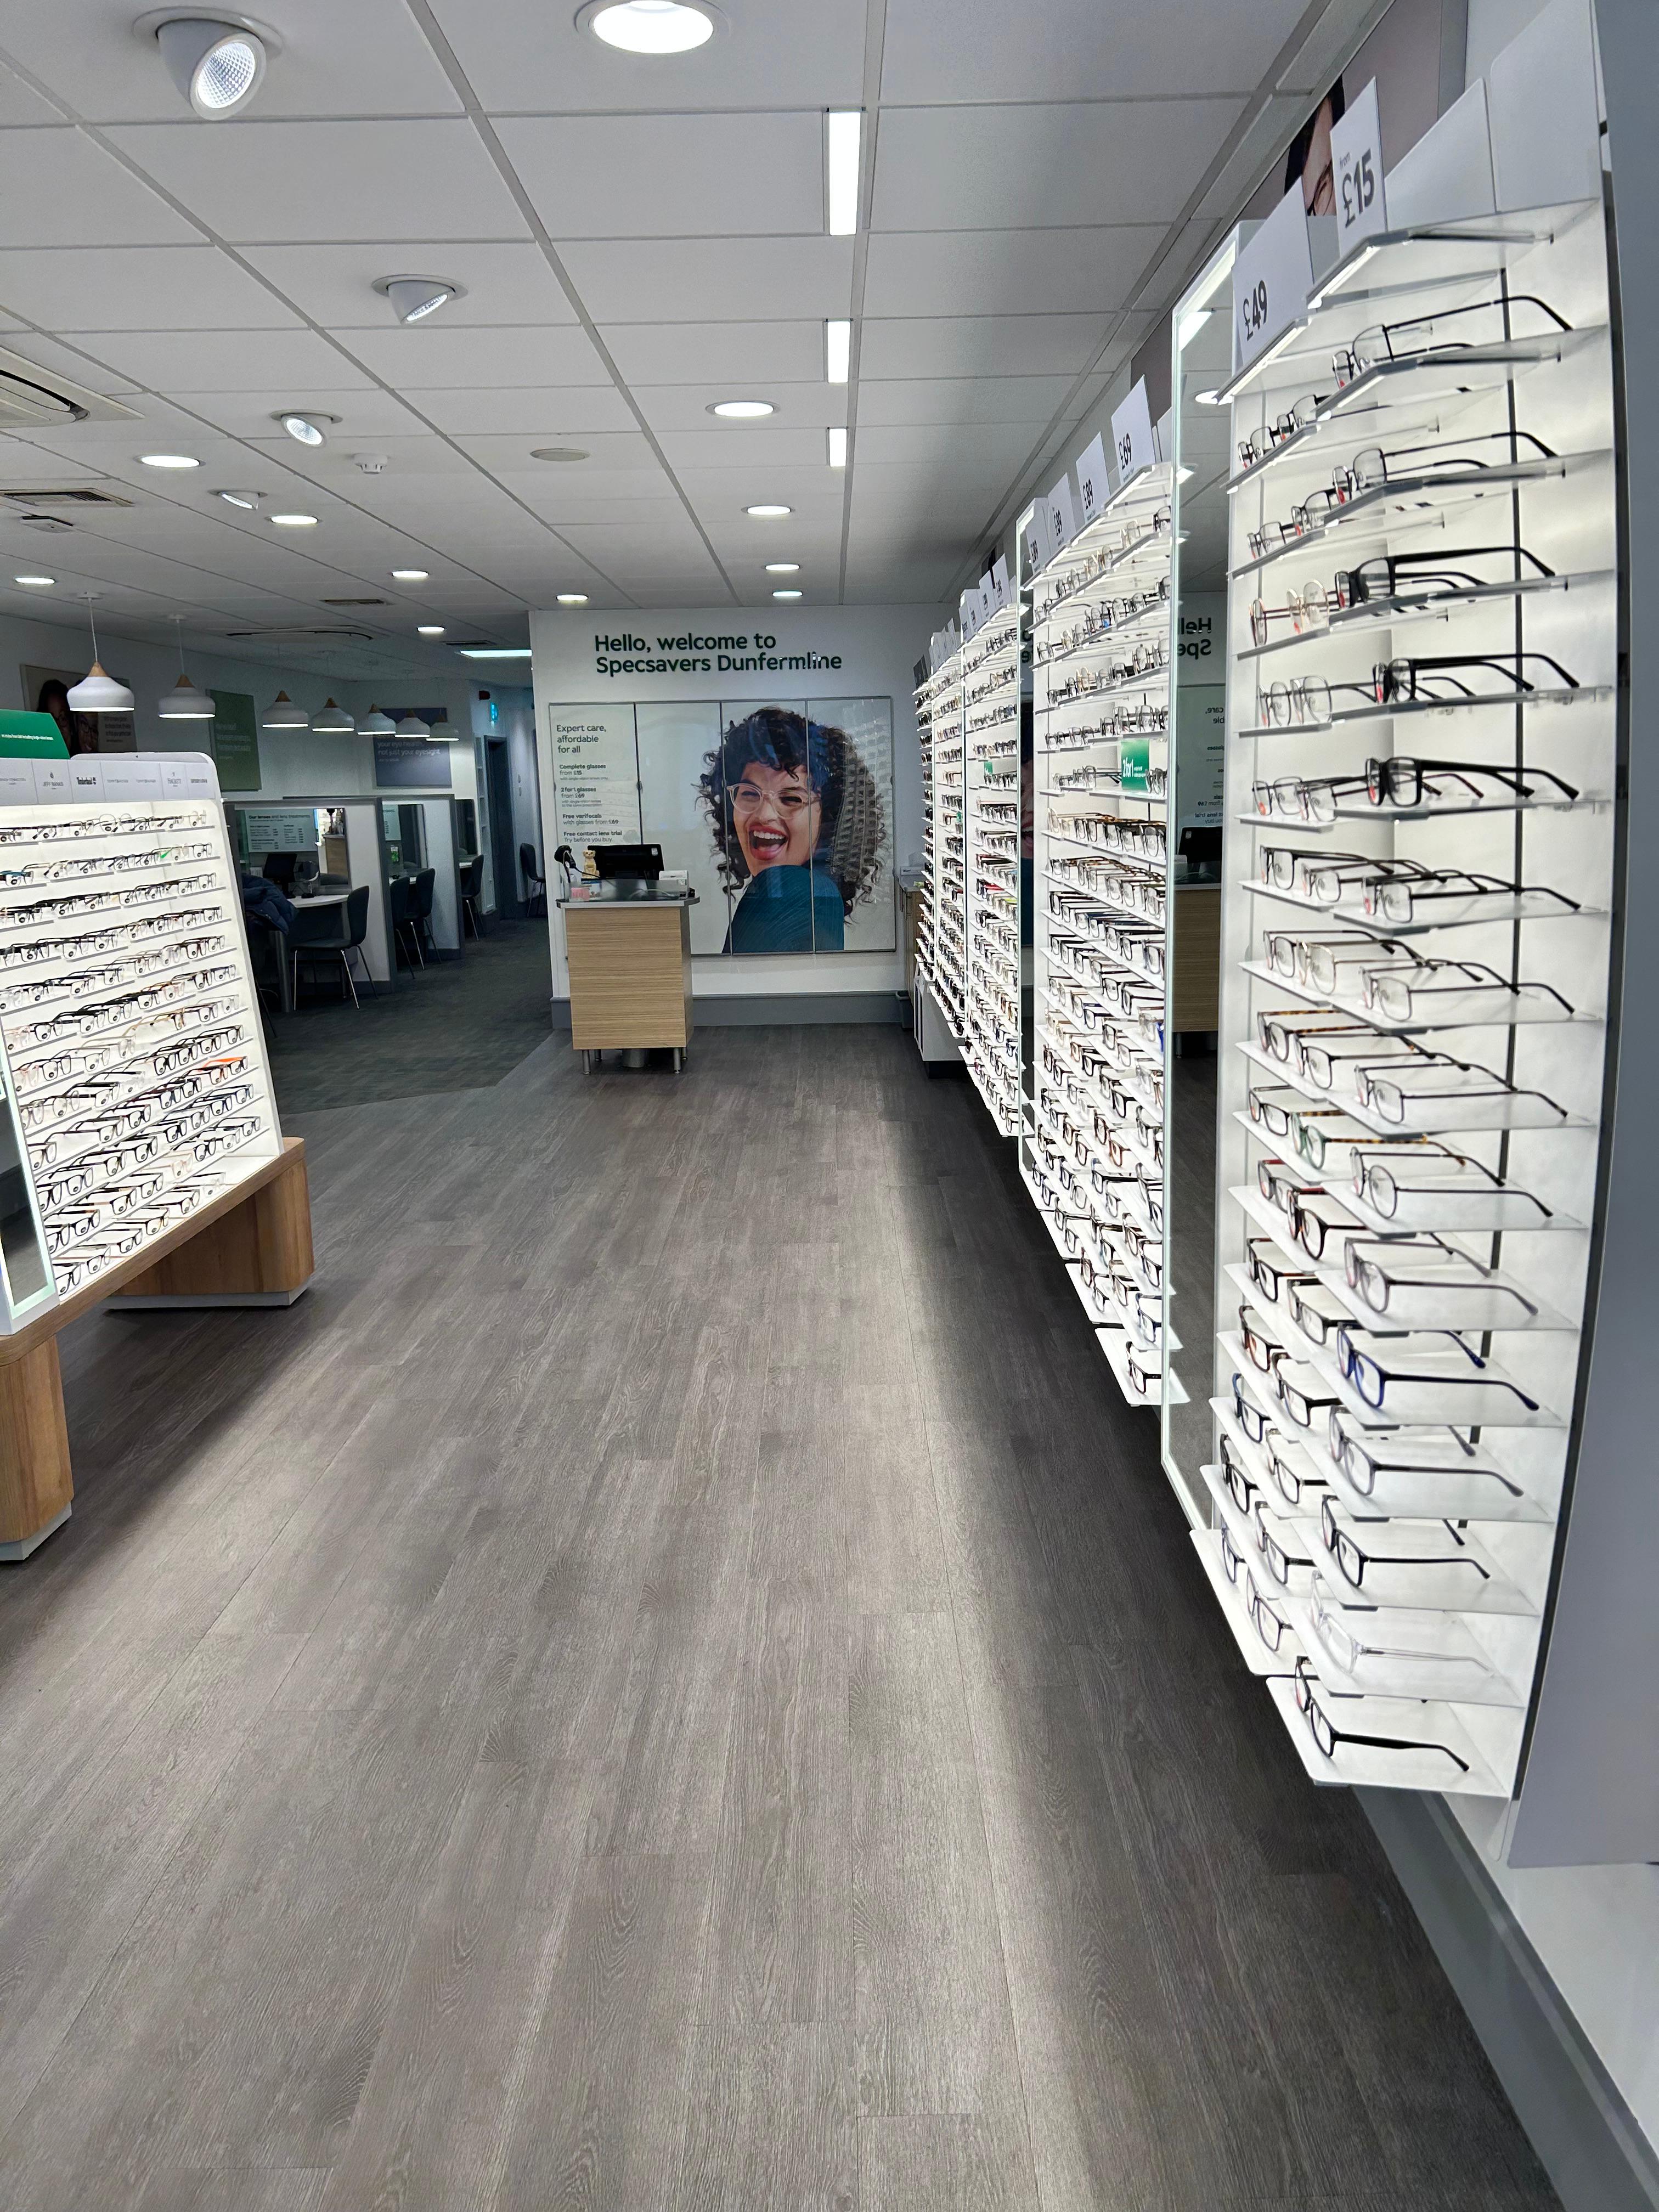 Specsavers Opticians and Audiologists - Dunfermline Specsavers Opticians and Audiologists - Dunfermline Dunfermline 01383 730050